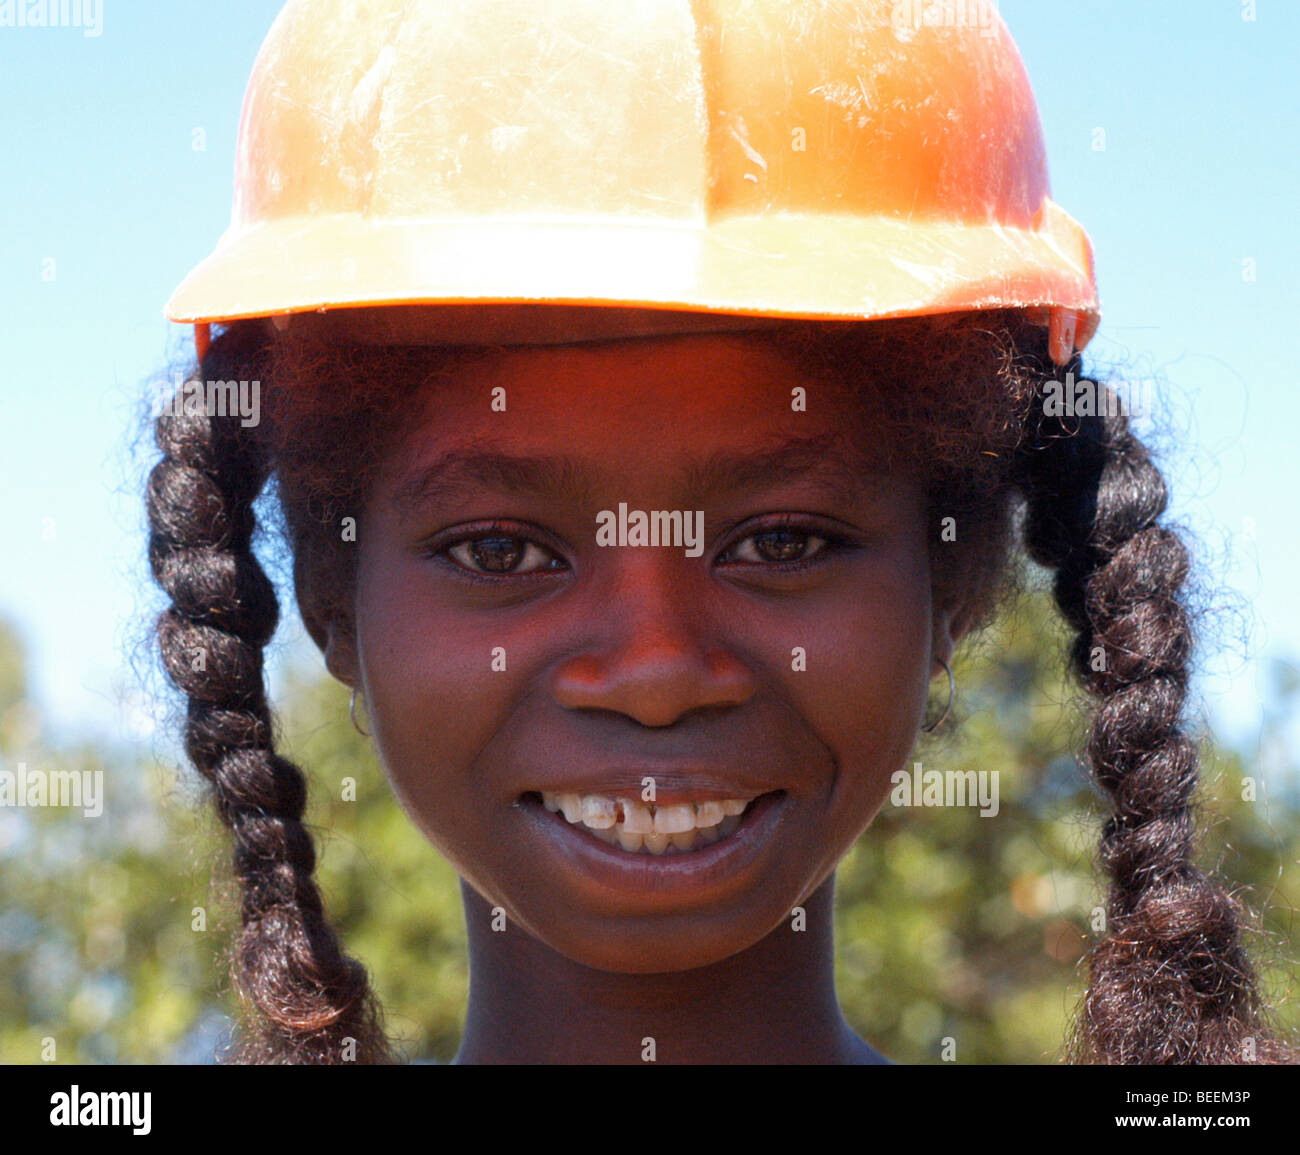 Madagascar - Smiling village girl wearing a safety helmet at the Anosy village of Agnena. Stock Photo